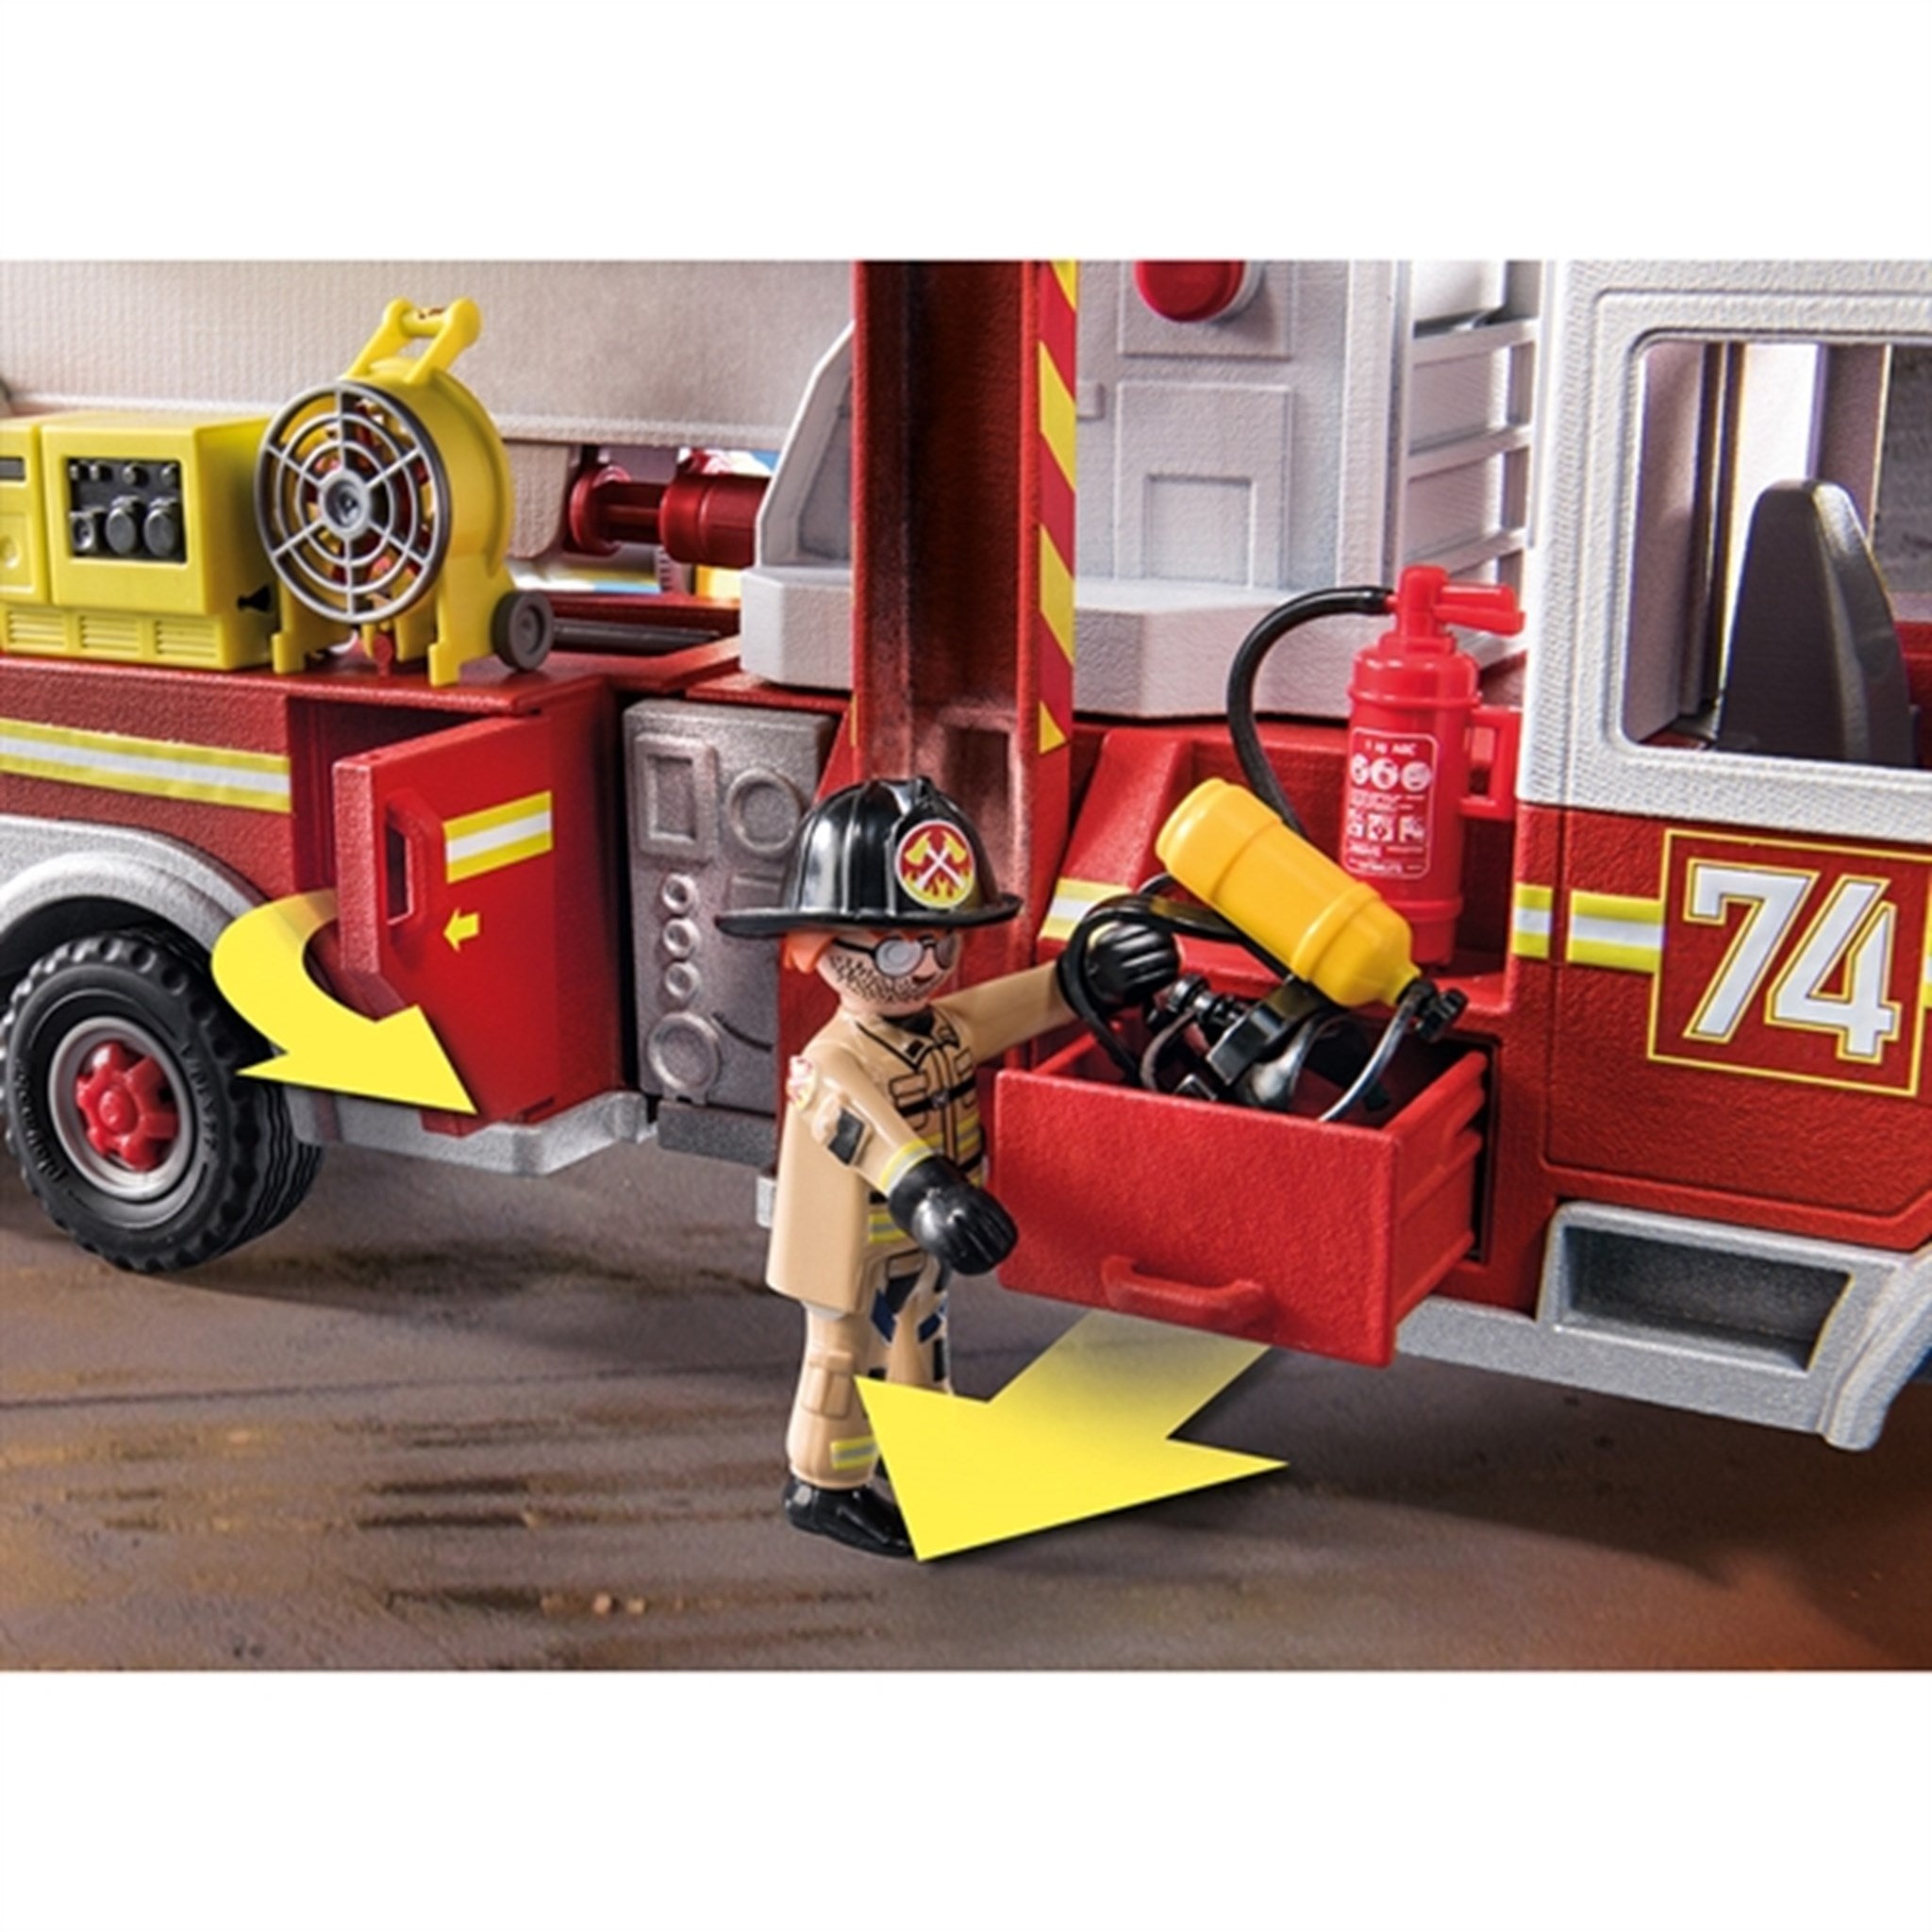 Playmobil® City Action - US Fire Engine with Tower Ladder 3